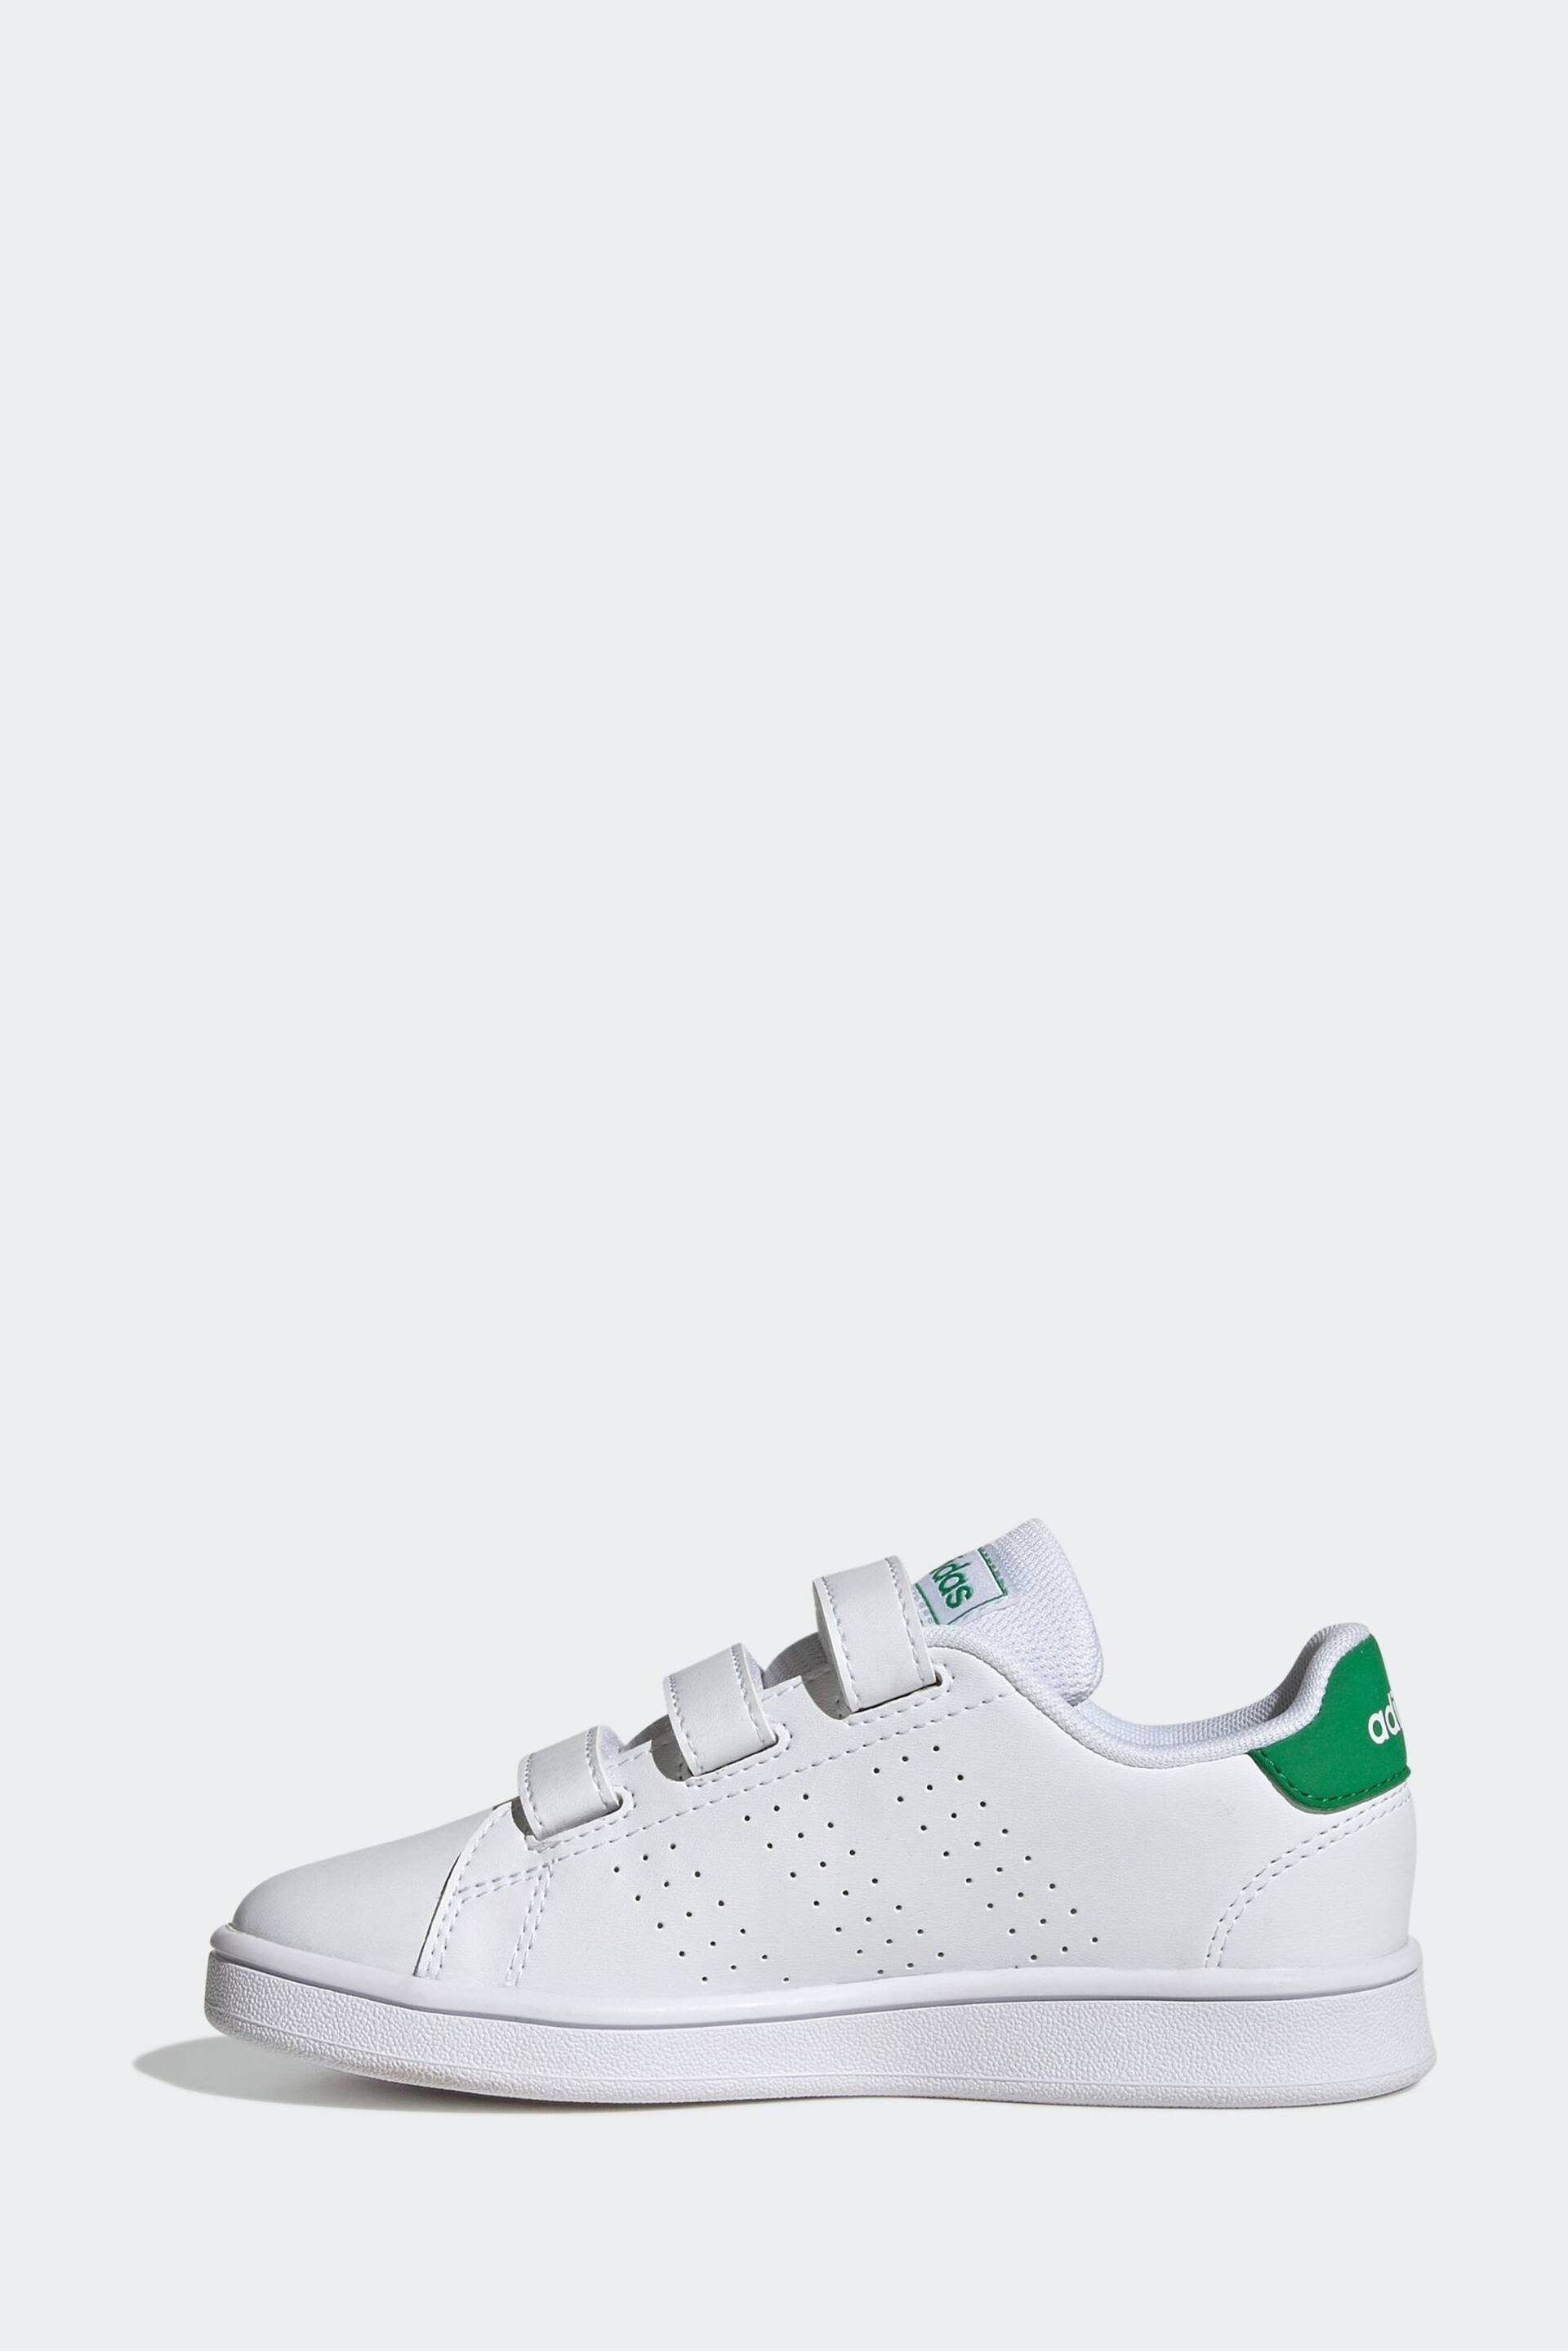 adidas Green/White Sportswear Advantage Court Lifestyle Hook And Loop Trainers - Image 2 of 9